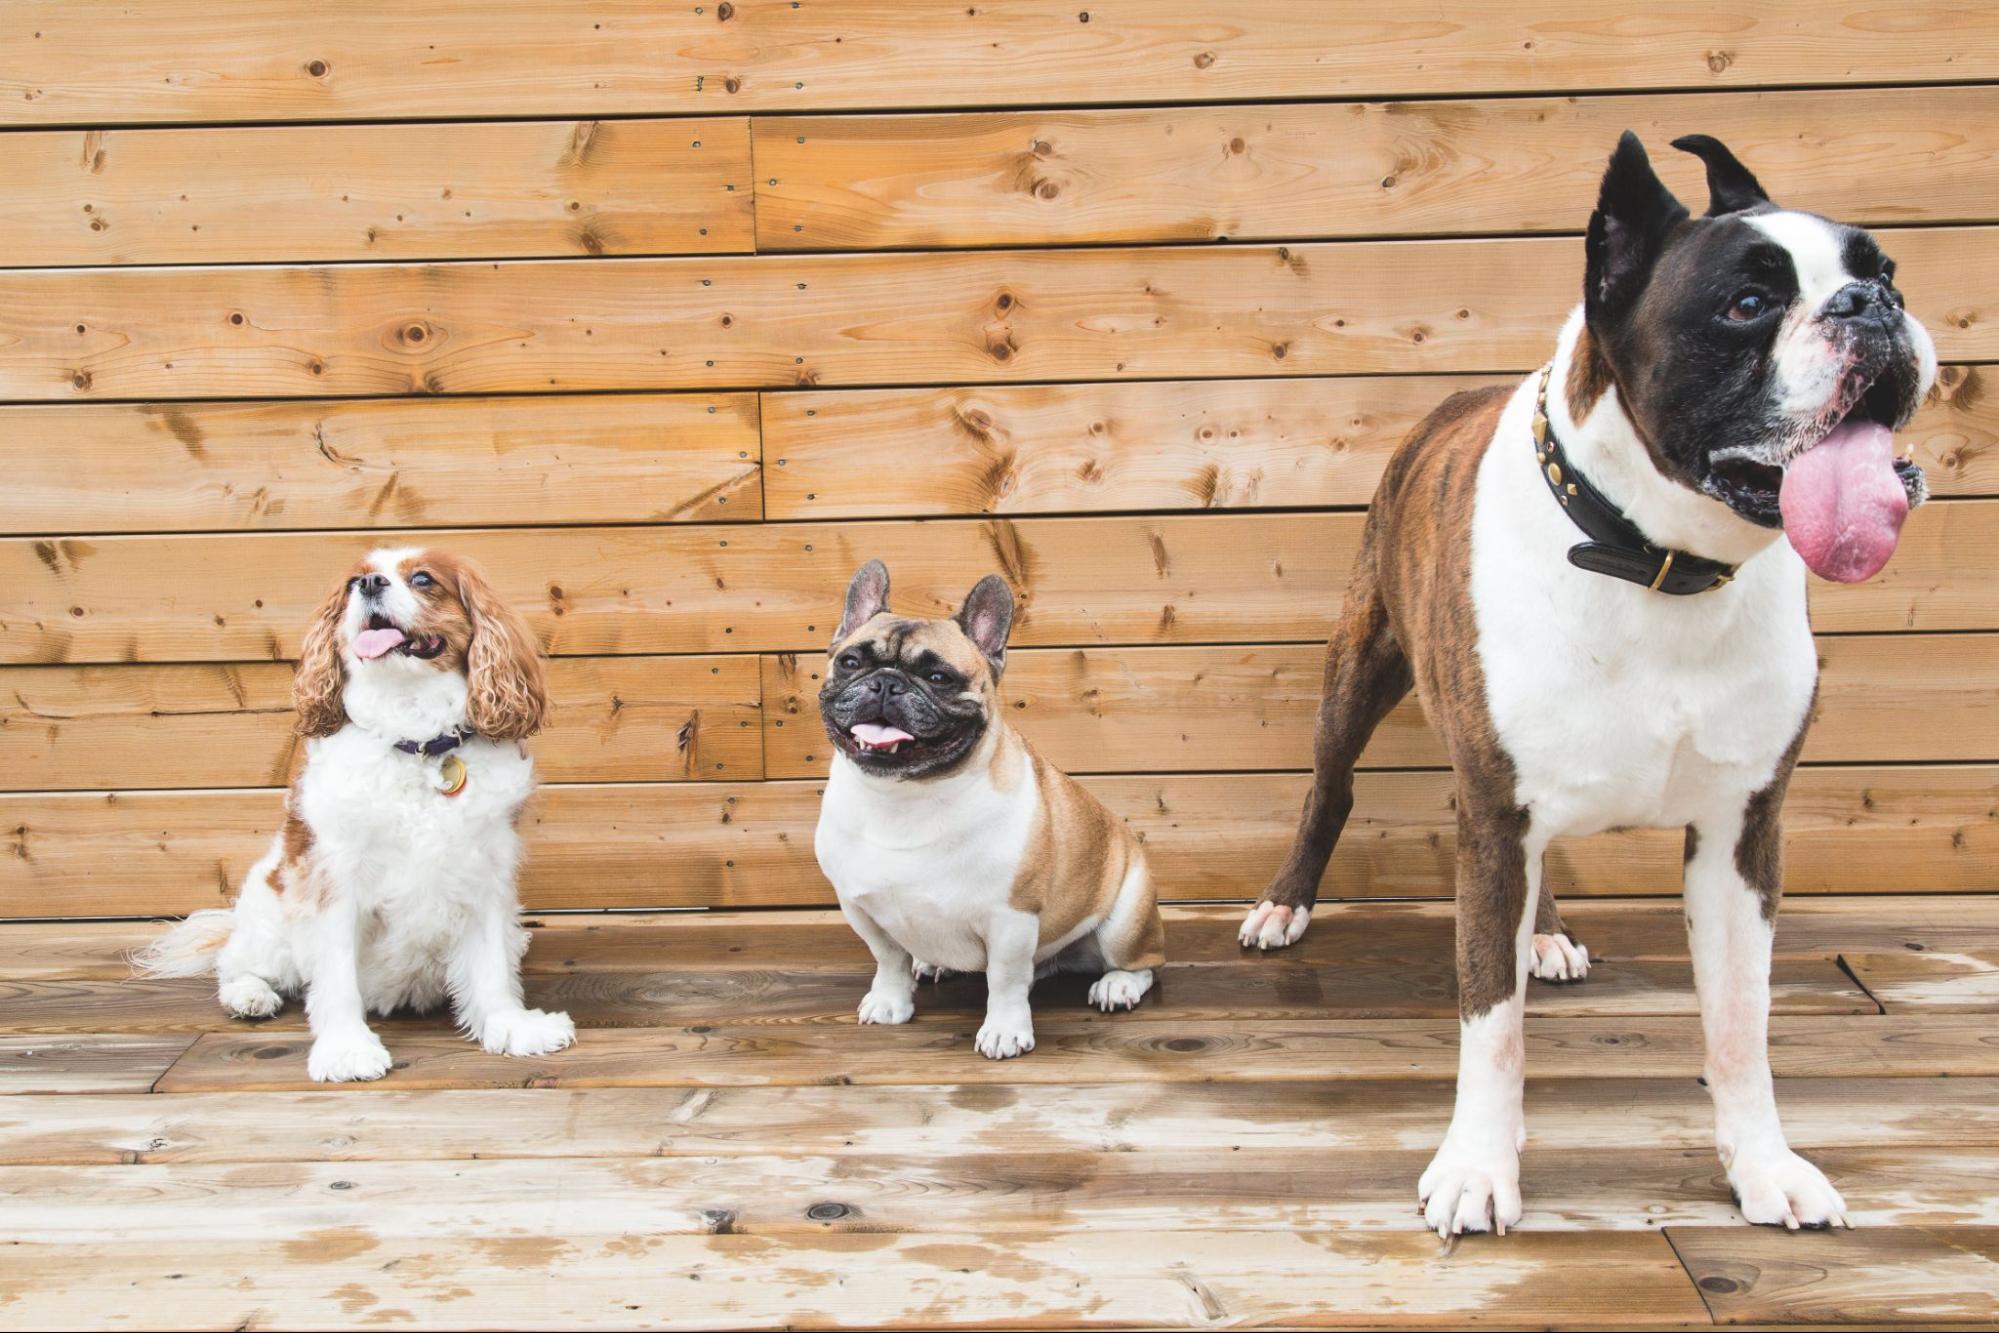 Three dogs line up against a wooden background.